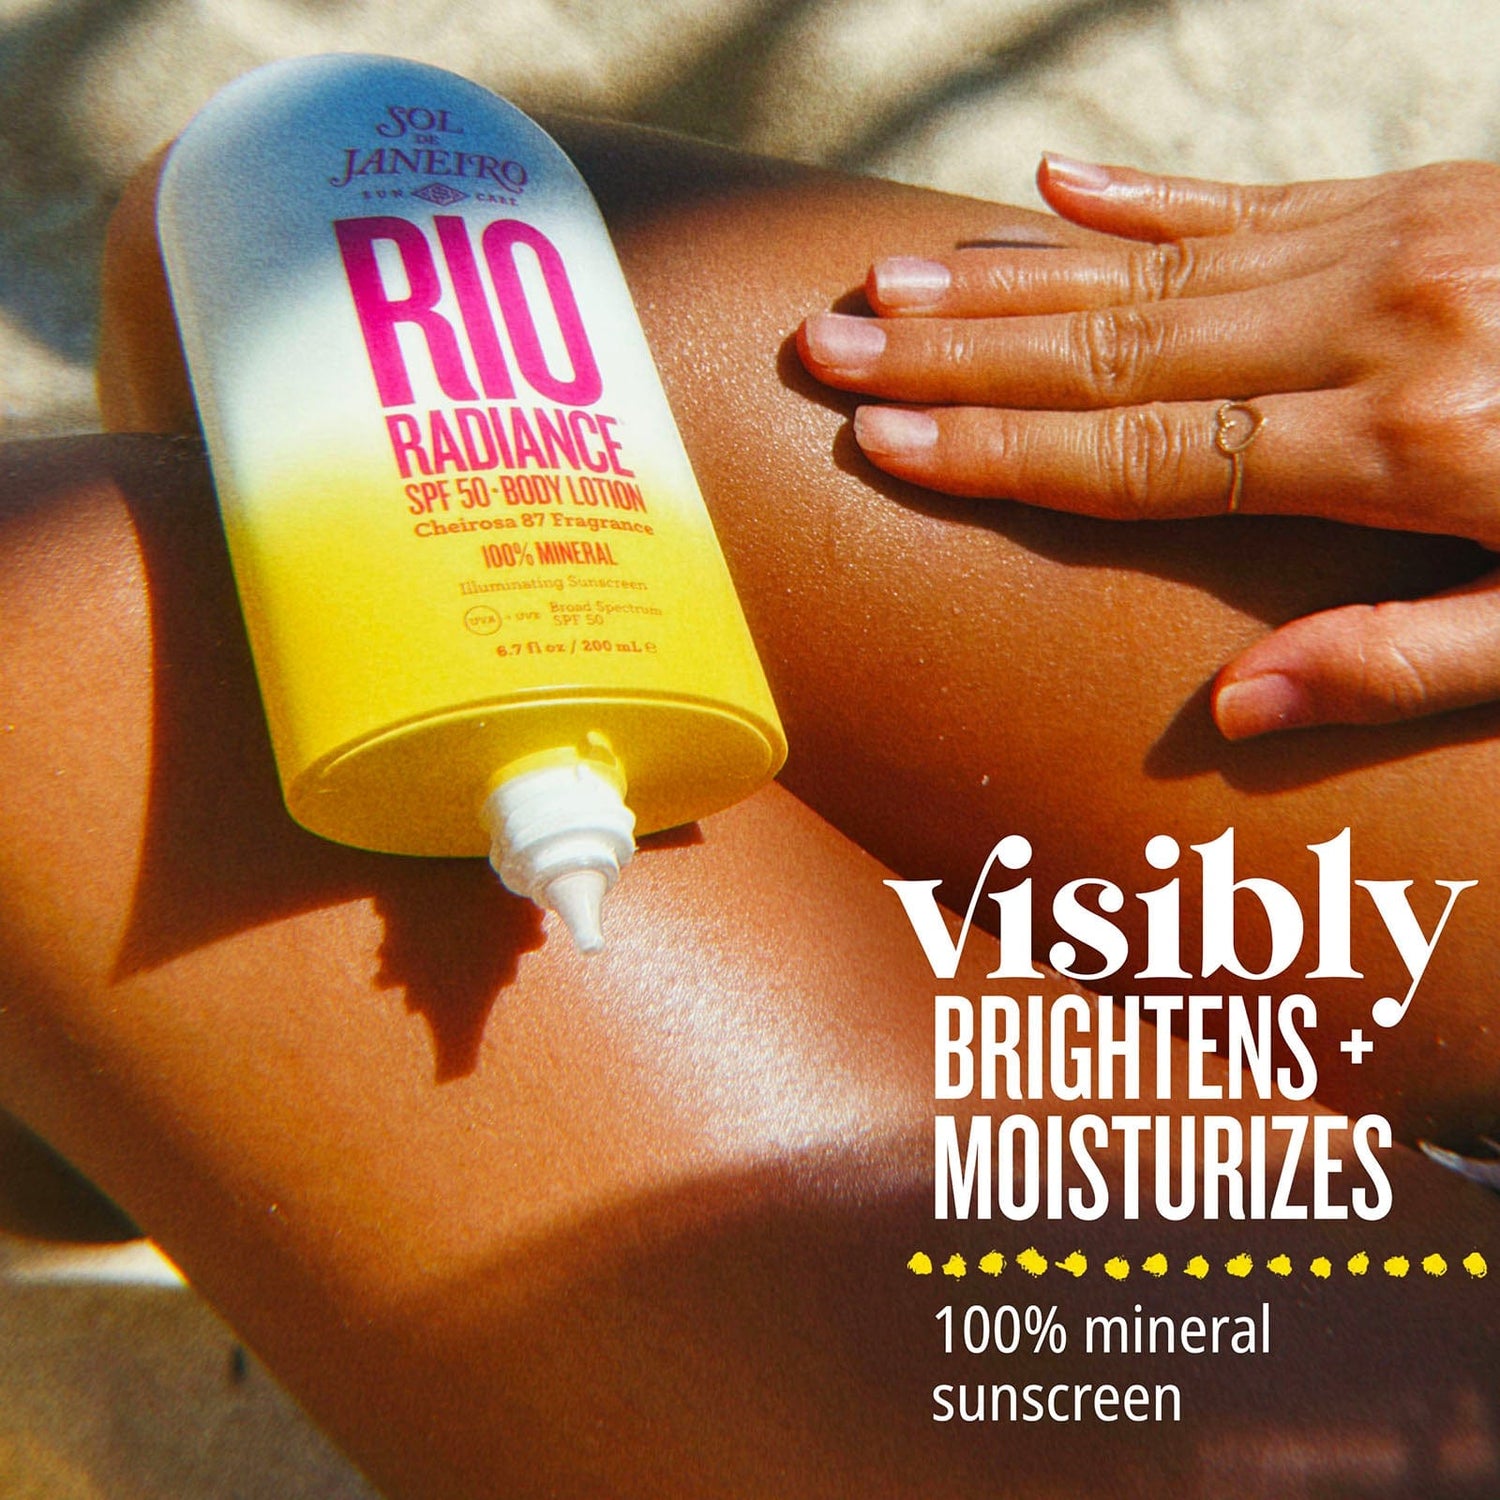 Visibly brightens + moisturizes 100% mineral sunscreen